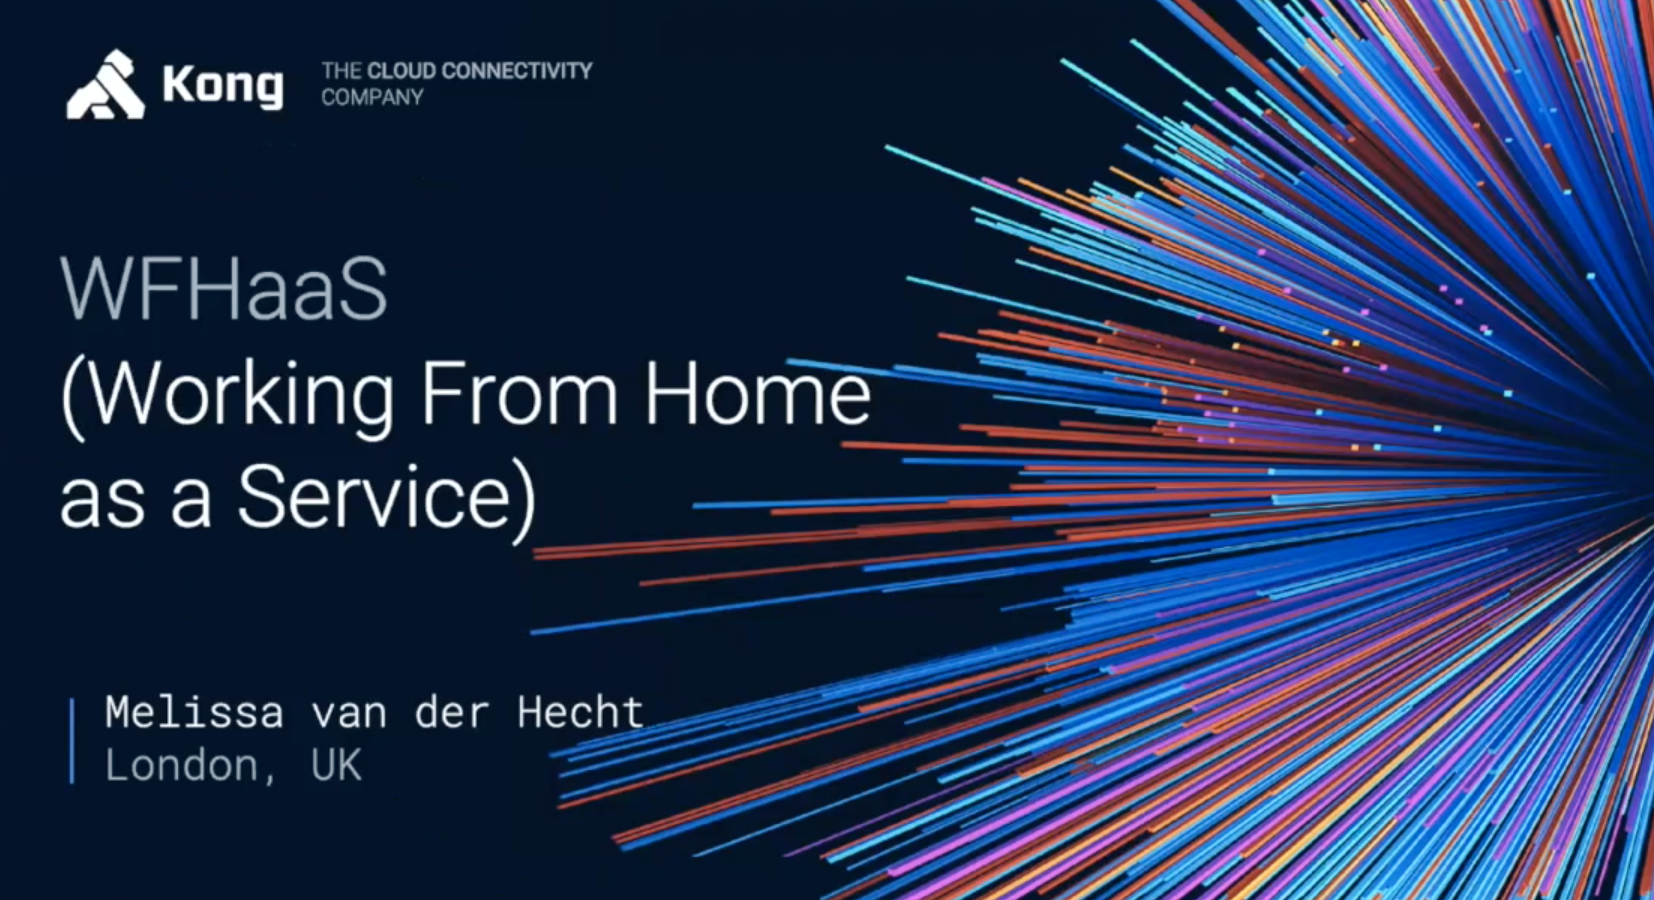 WFHaaS: Working From Home as a Service